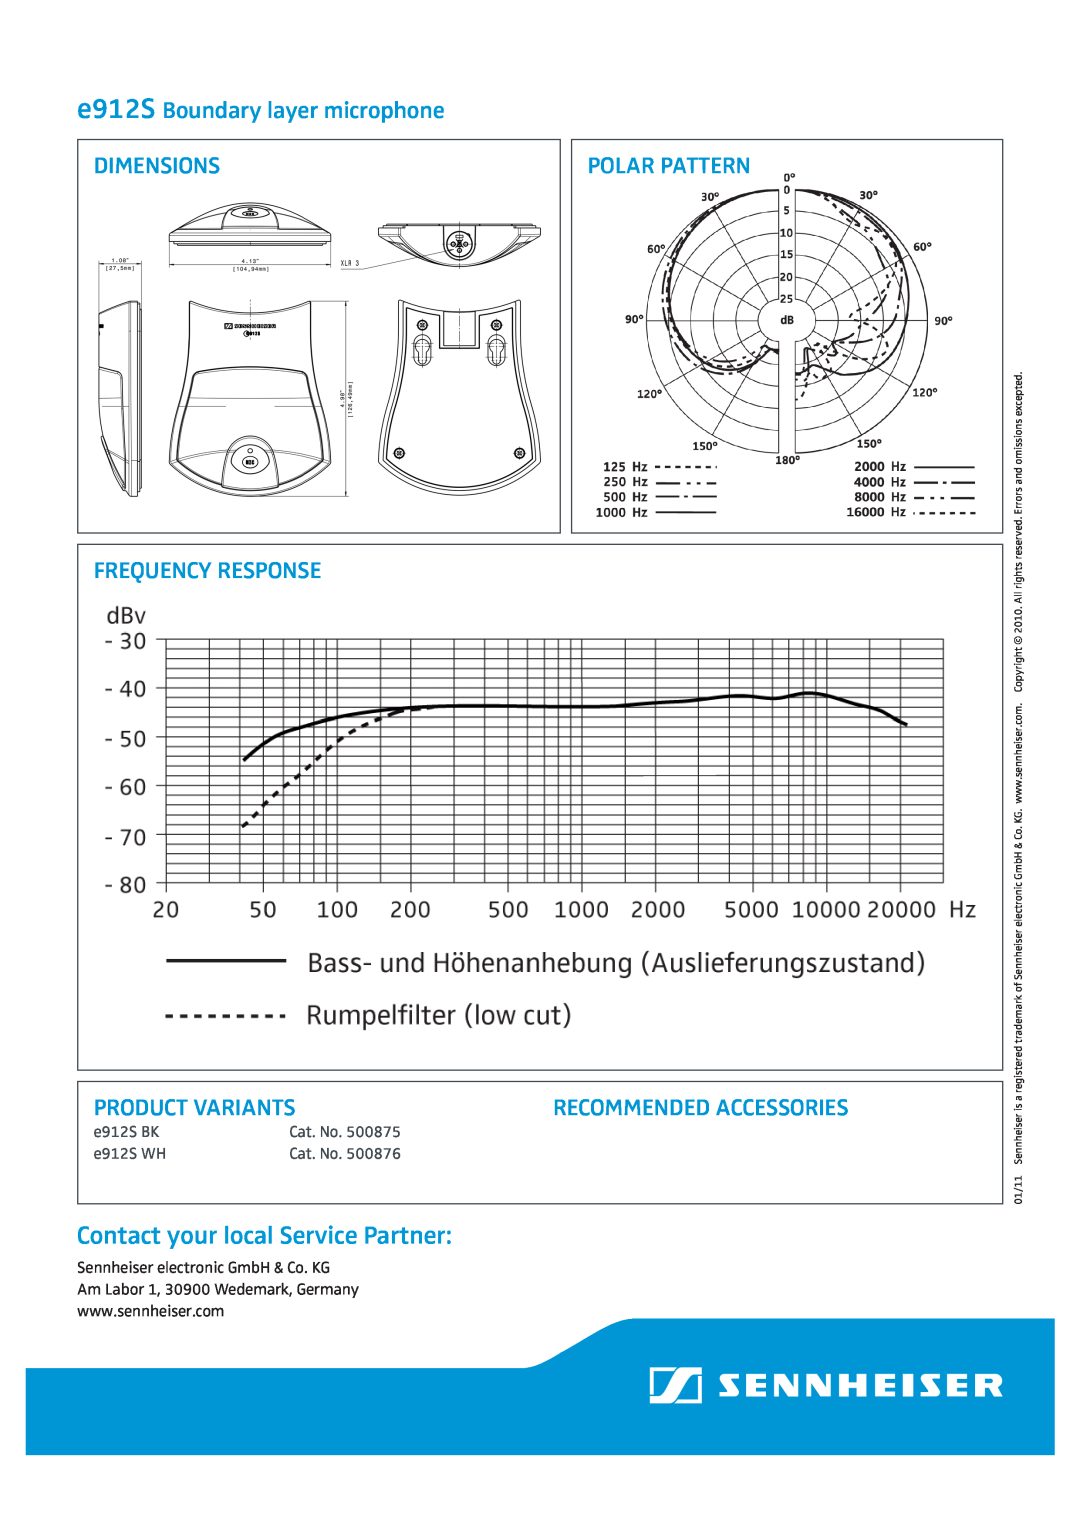 Sennheiser E912S e912S Boundary layer microphone, Dimensions, Polar Pattern, Frequency Response, Product Variants 